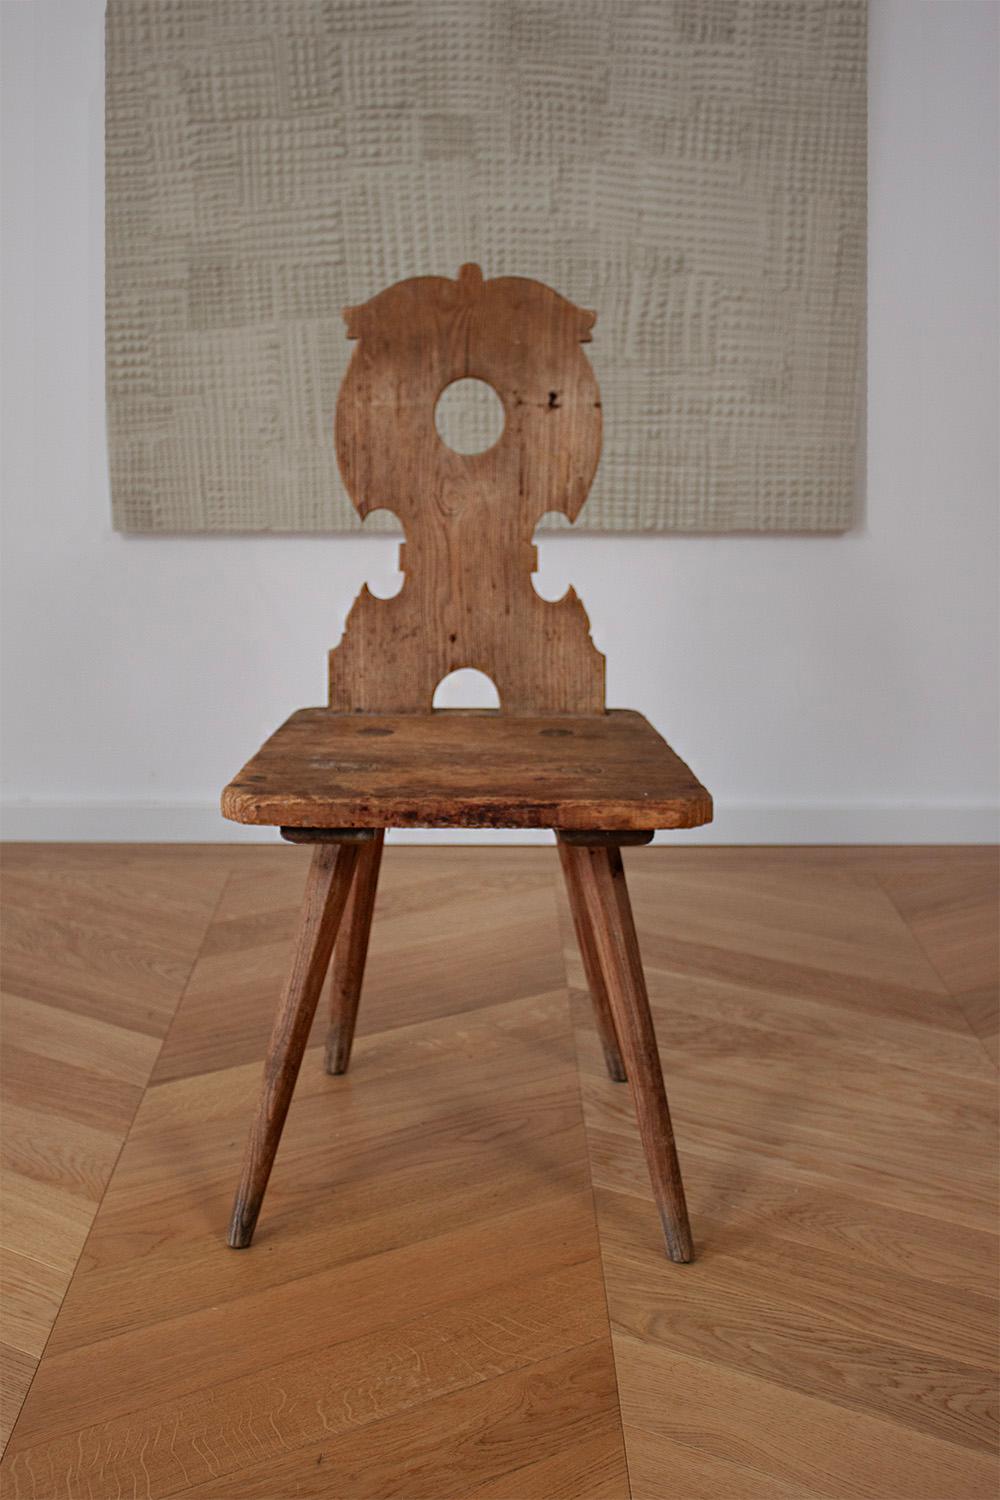 This beautiful old German Stabelle is a typical farmers' chair from the turn of the century. 
The chair is primitivly made with no glue or nails. The construction is based on an interlocking system. 
The tradition behind these chairs are that during